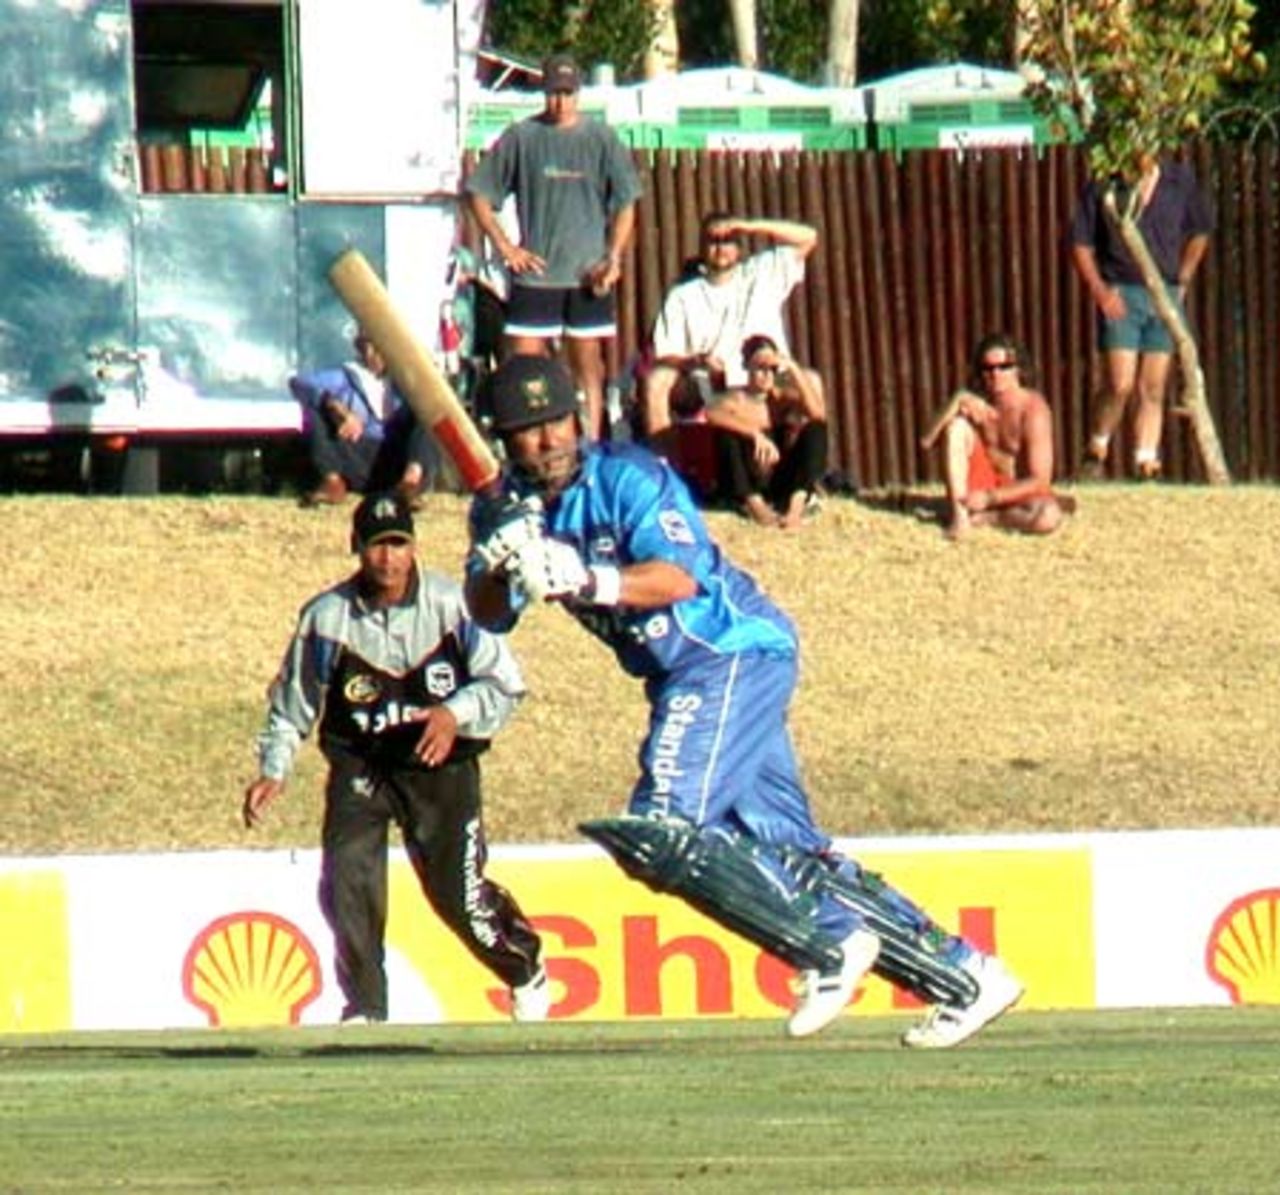 WP captain HD Ackerman turns a ball to the square leg boundary against Boland in a Standard Bank Cup match at Paarl on Friday